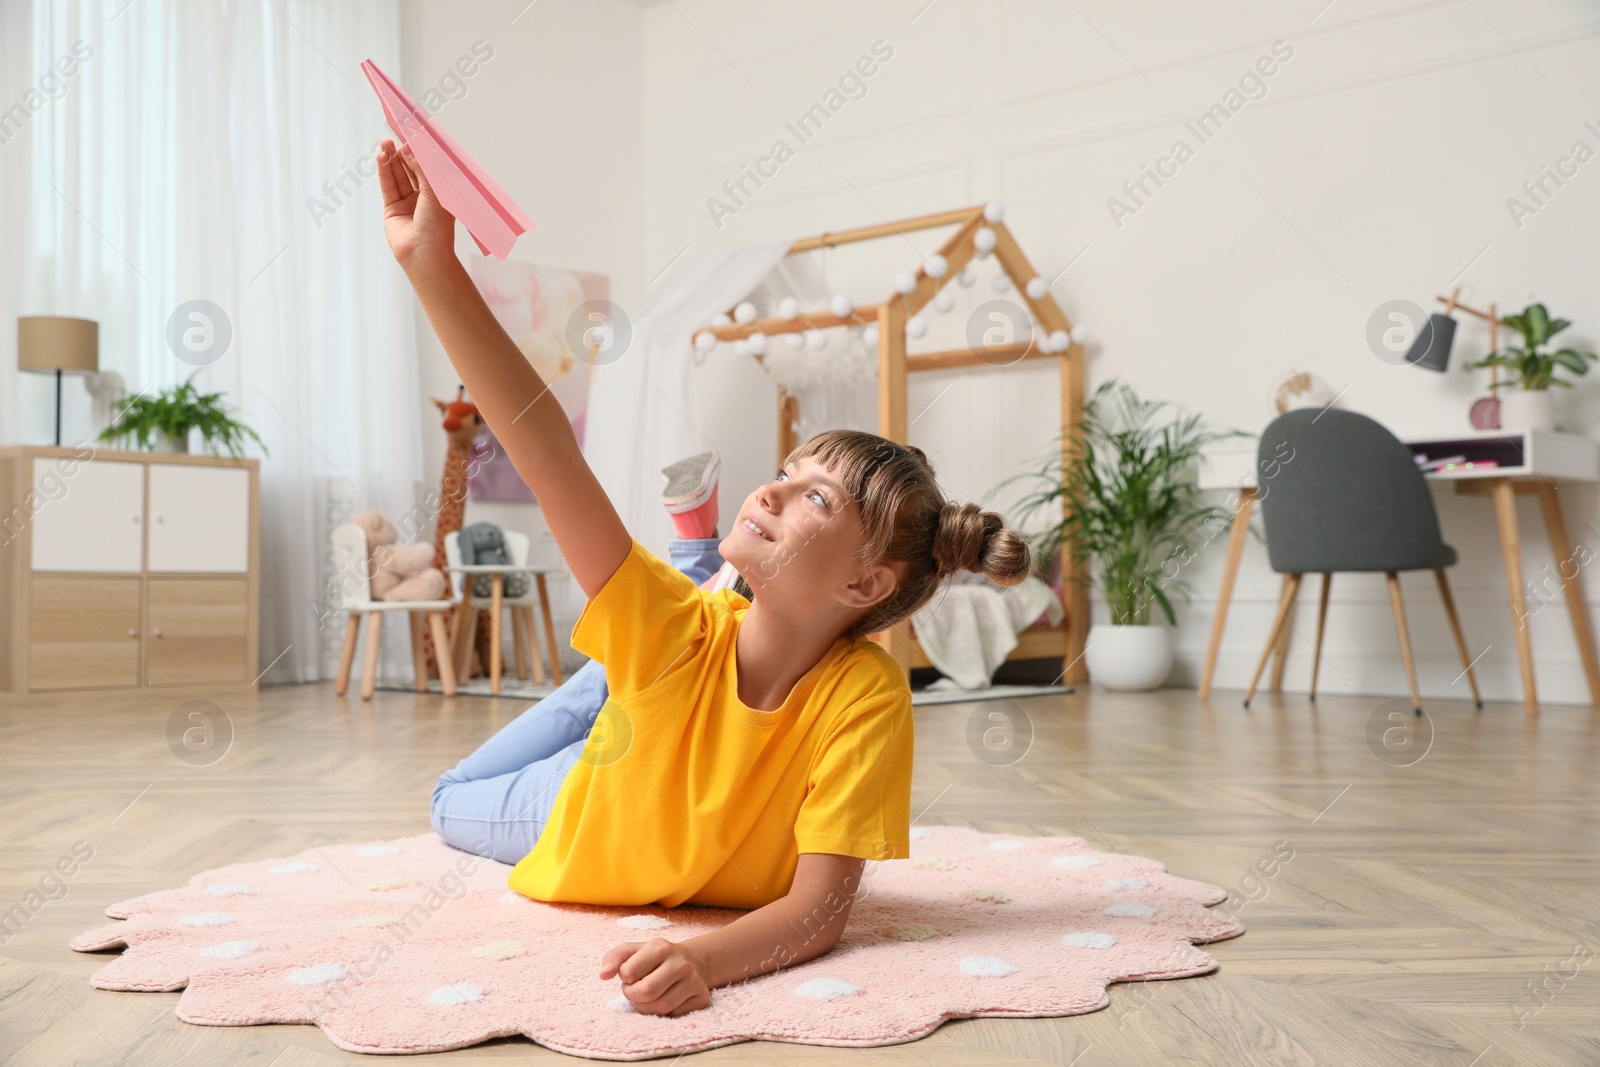 Photo of Cute little girl playing with paper plane on floor in room